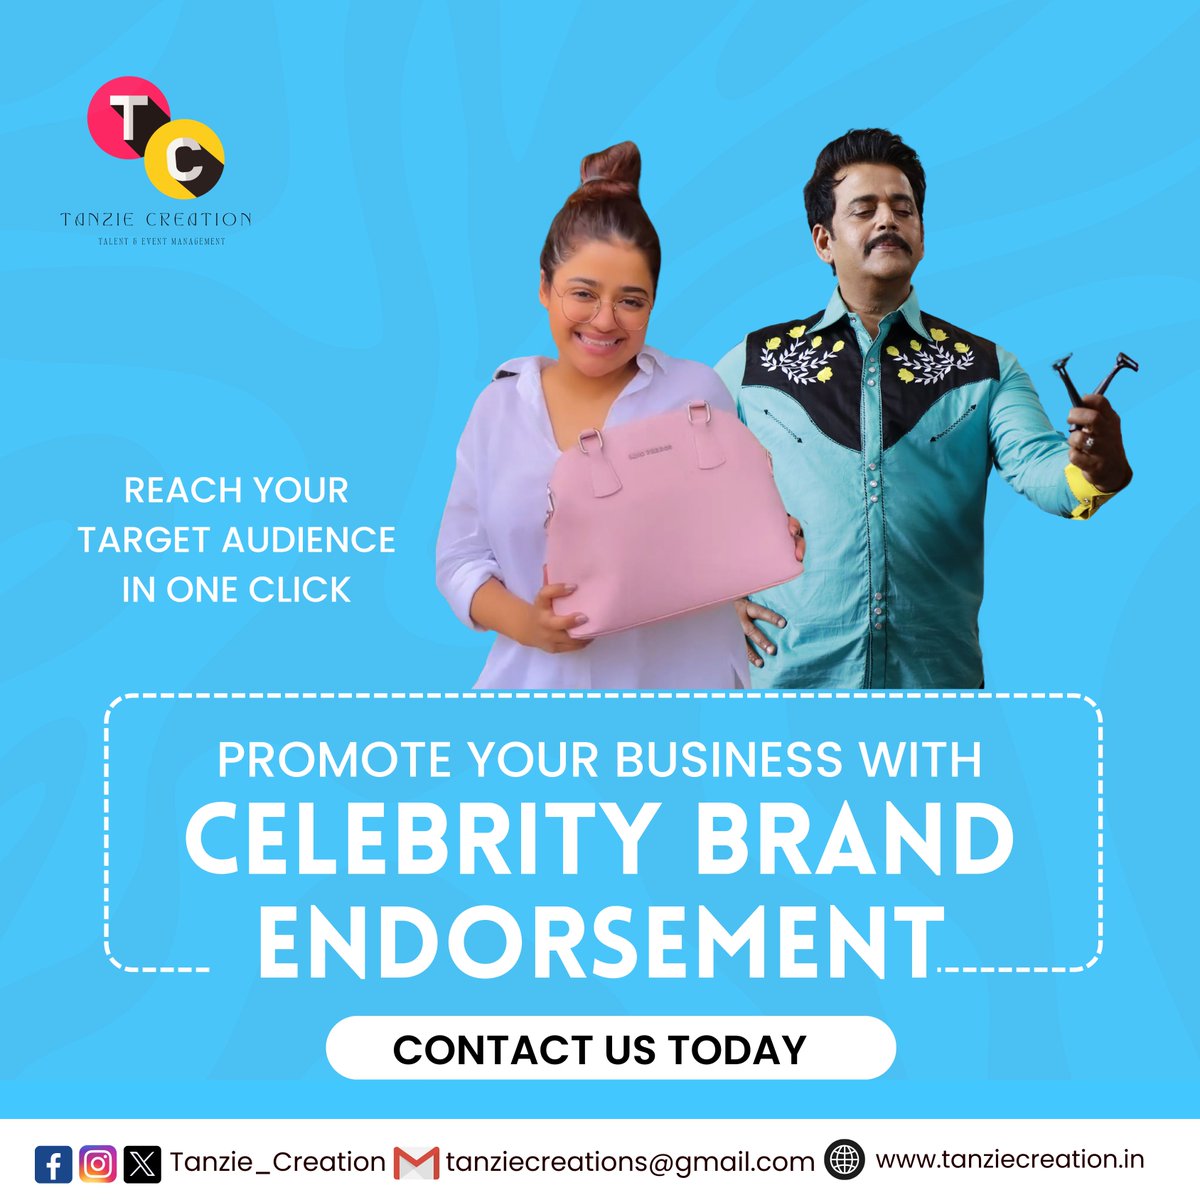 Get your brand in front of millions with a celebrity endorsement. Contact us and watch your target audience fall in love! ✨

#celebrityendorsement, #marketingstrategy, #brandgrowth, #influencermarketing #TanzieCreation #TalentManagementAgency